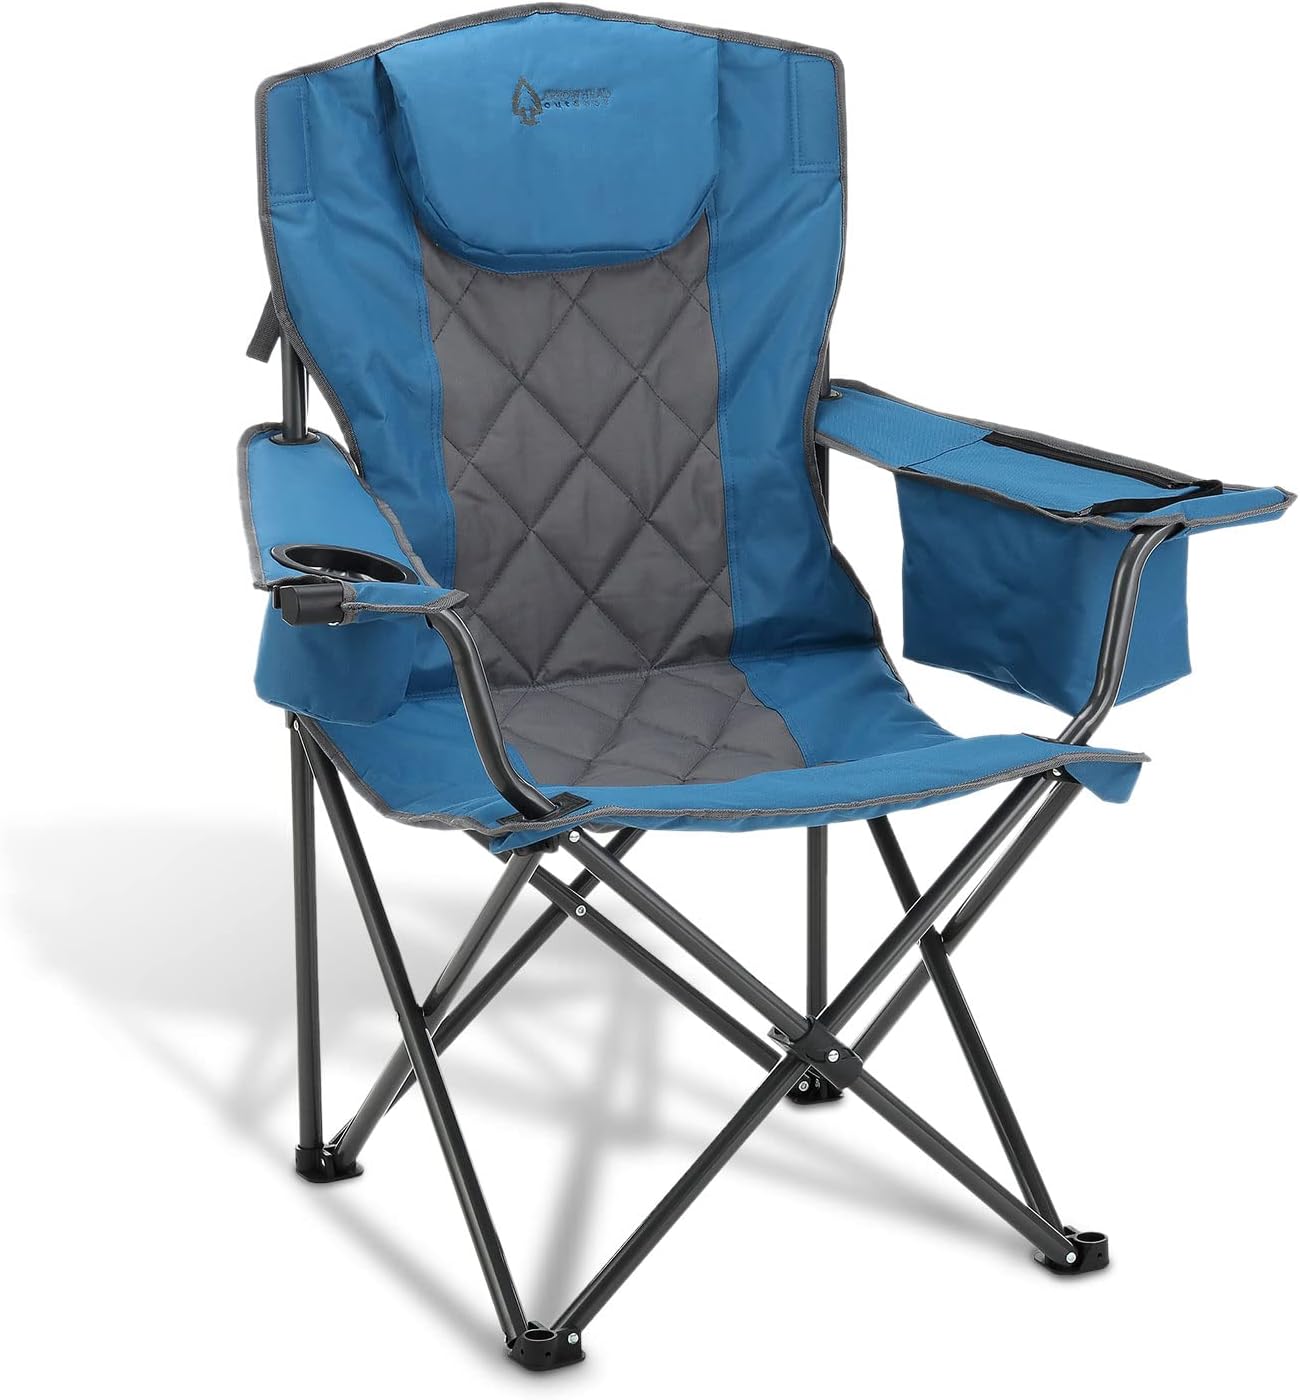 Portable Folding Camping Quad Chair w/ 6-Can Cooler